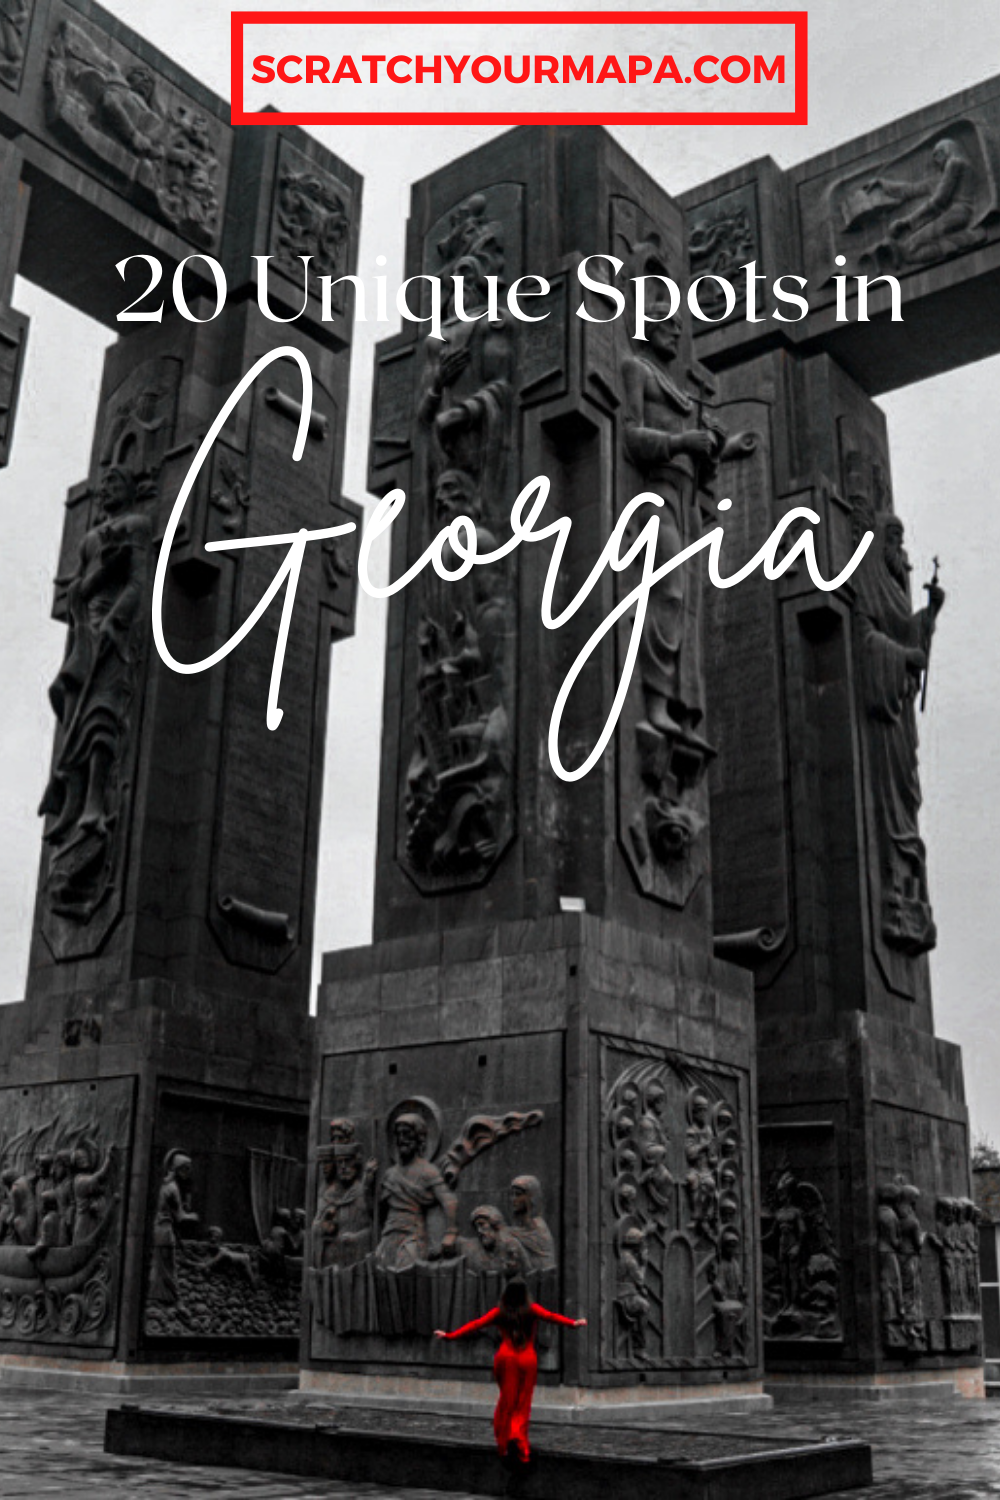 Places to Visit in Georgia Pin